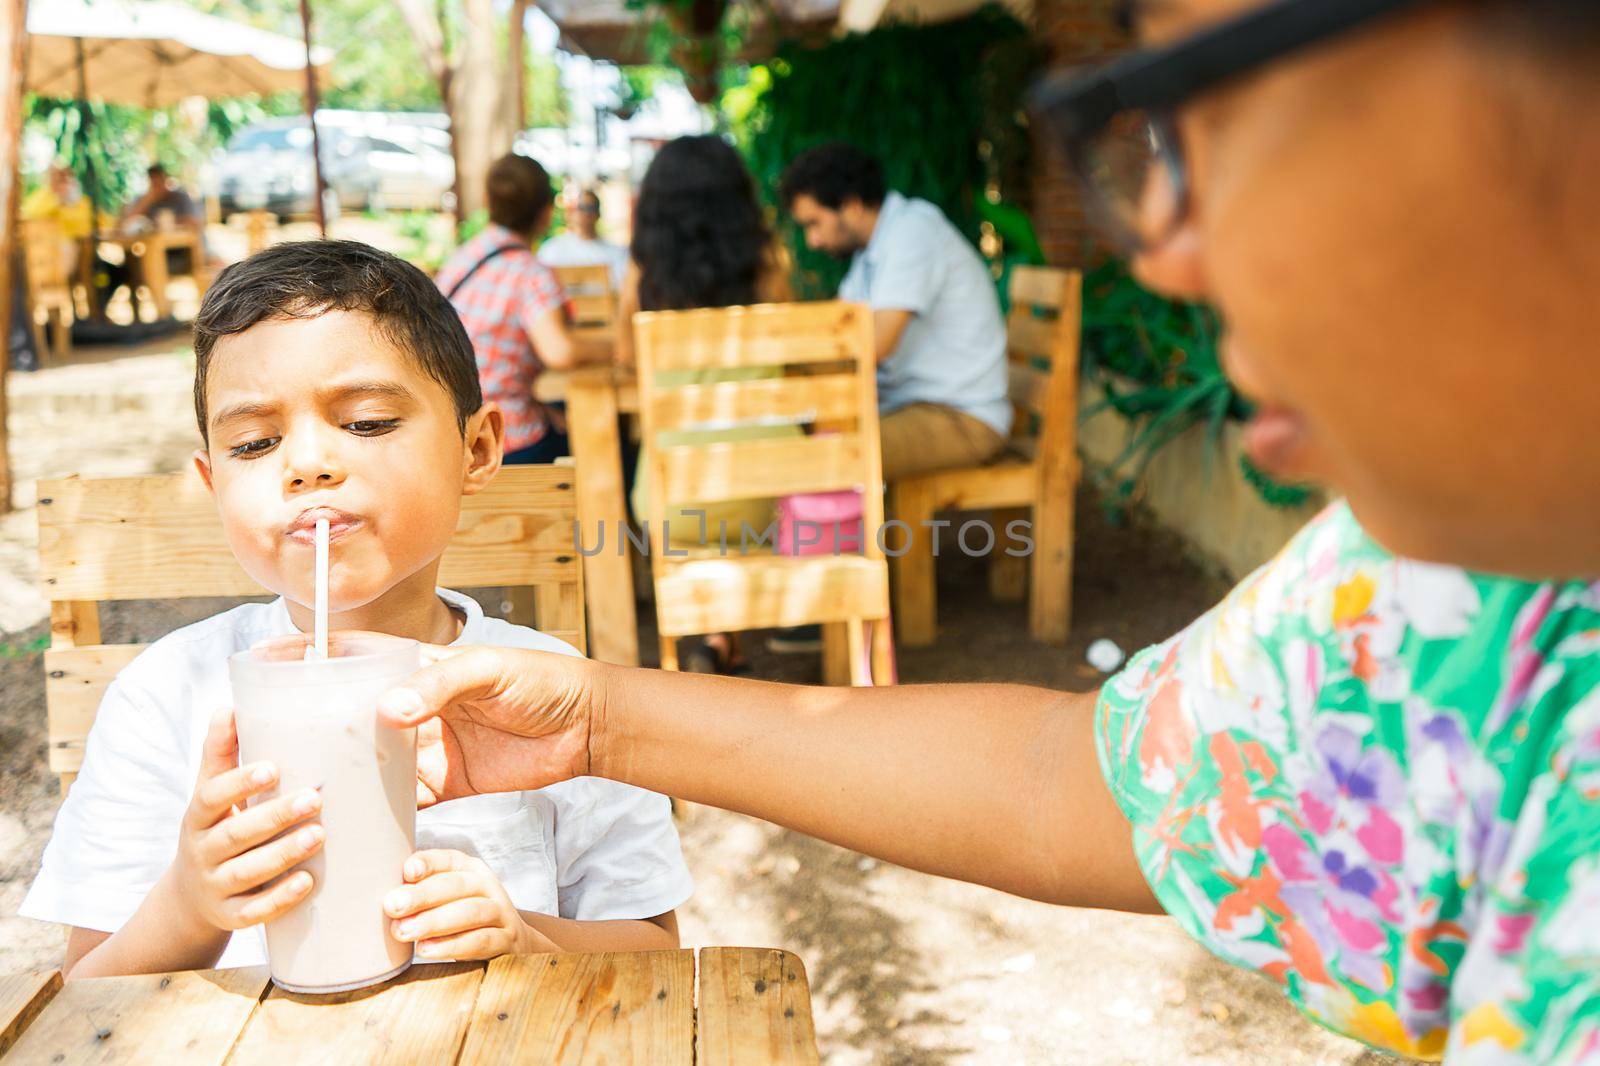 Latin mother giving her son a milkshake to drink in a country restaurant in Nicaragua by cfalvarez